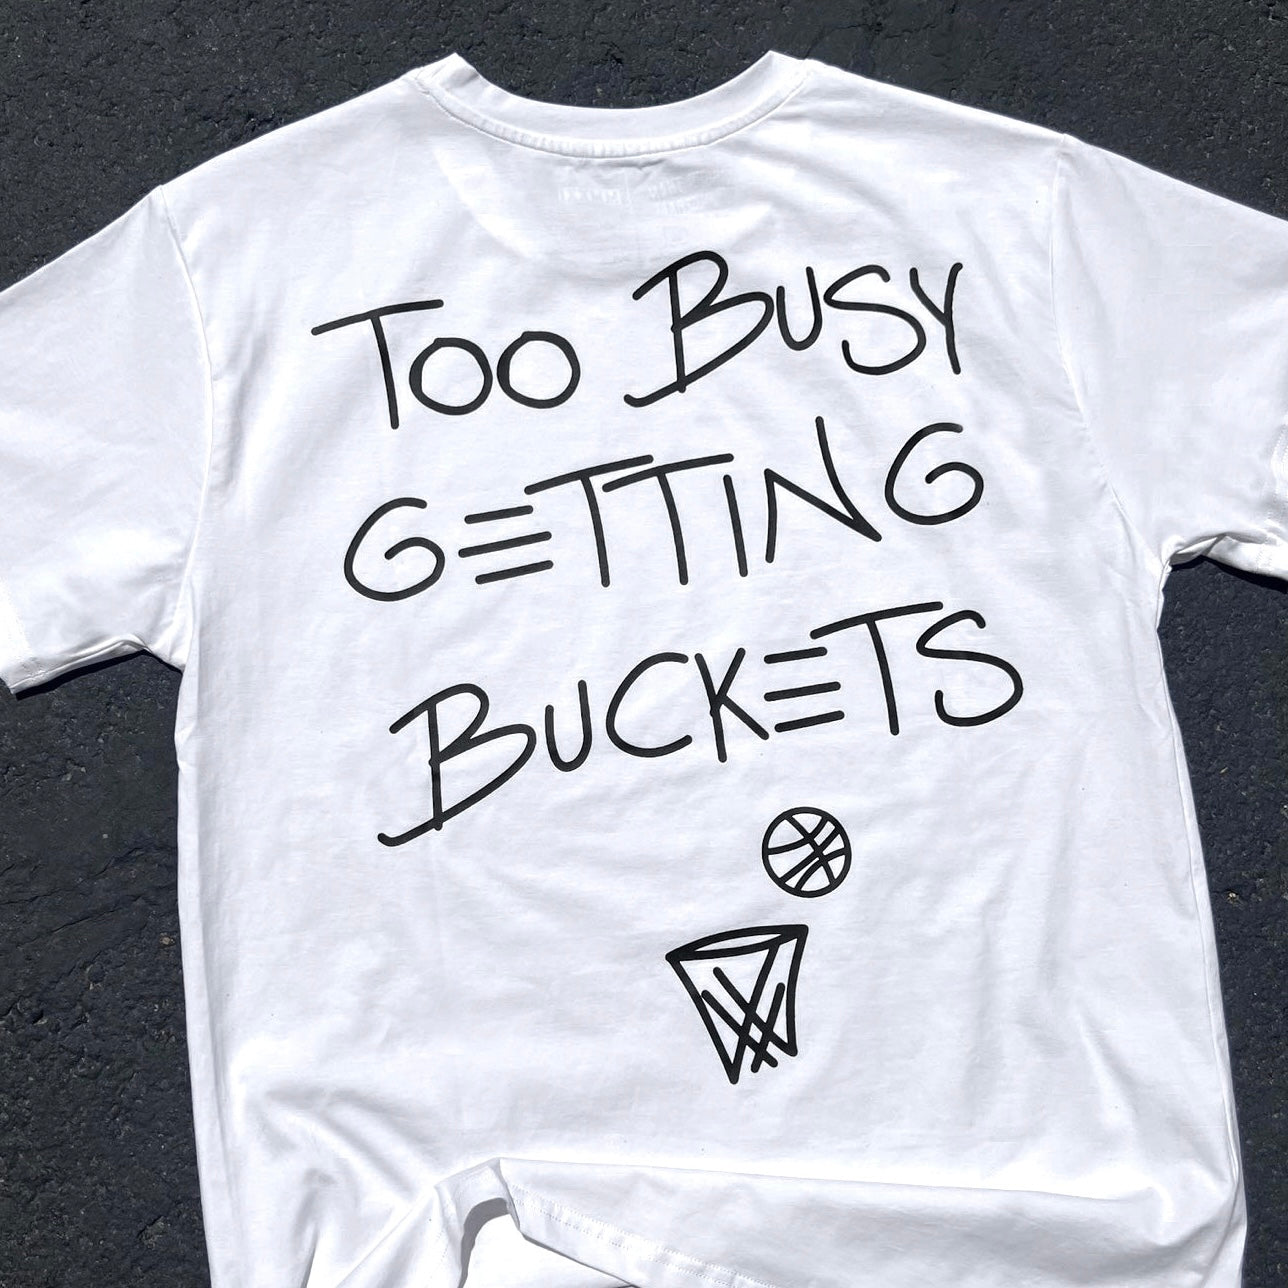 Too Busy Getting Buckets T-Shirt - White